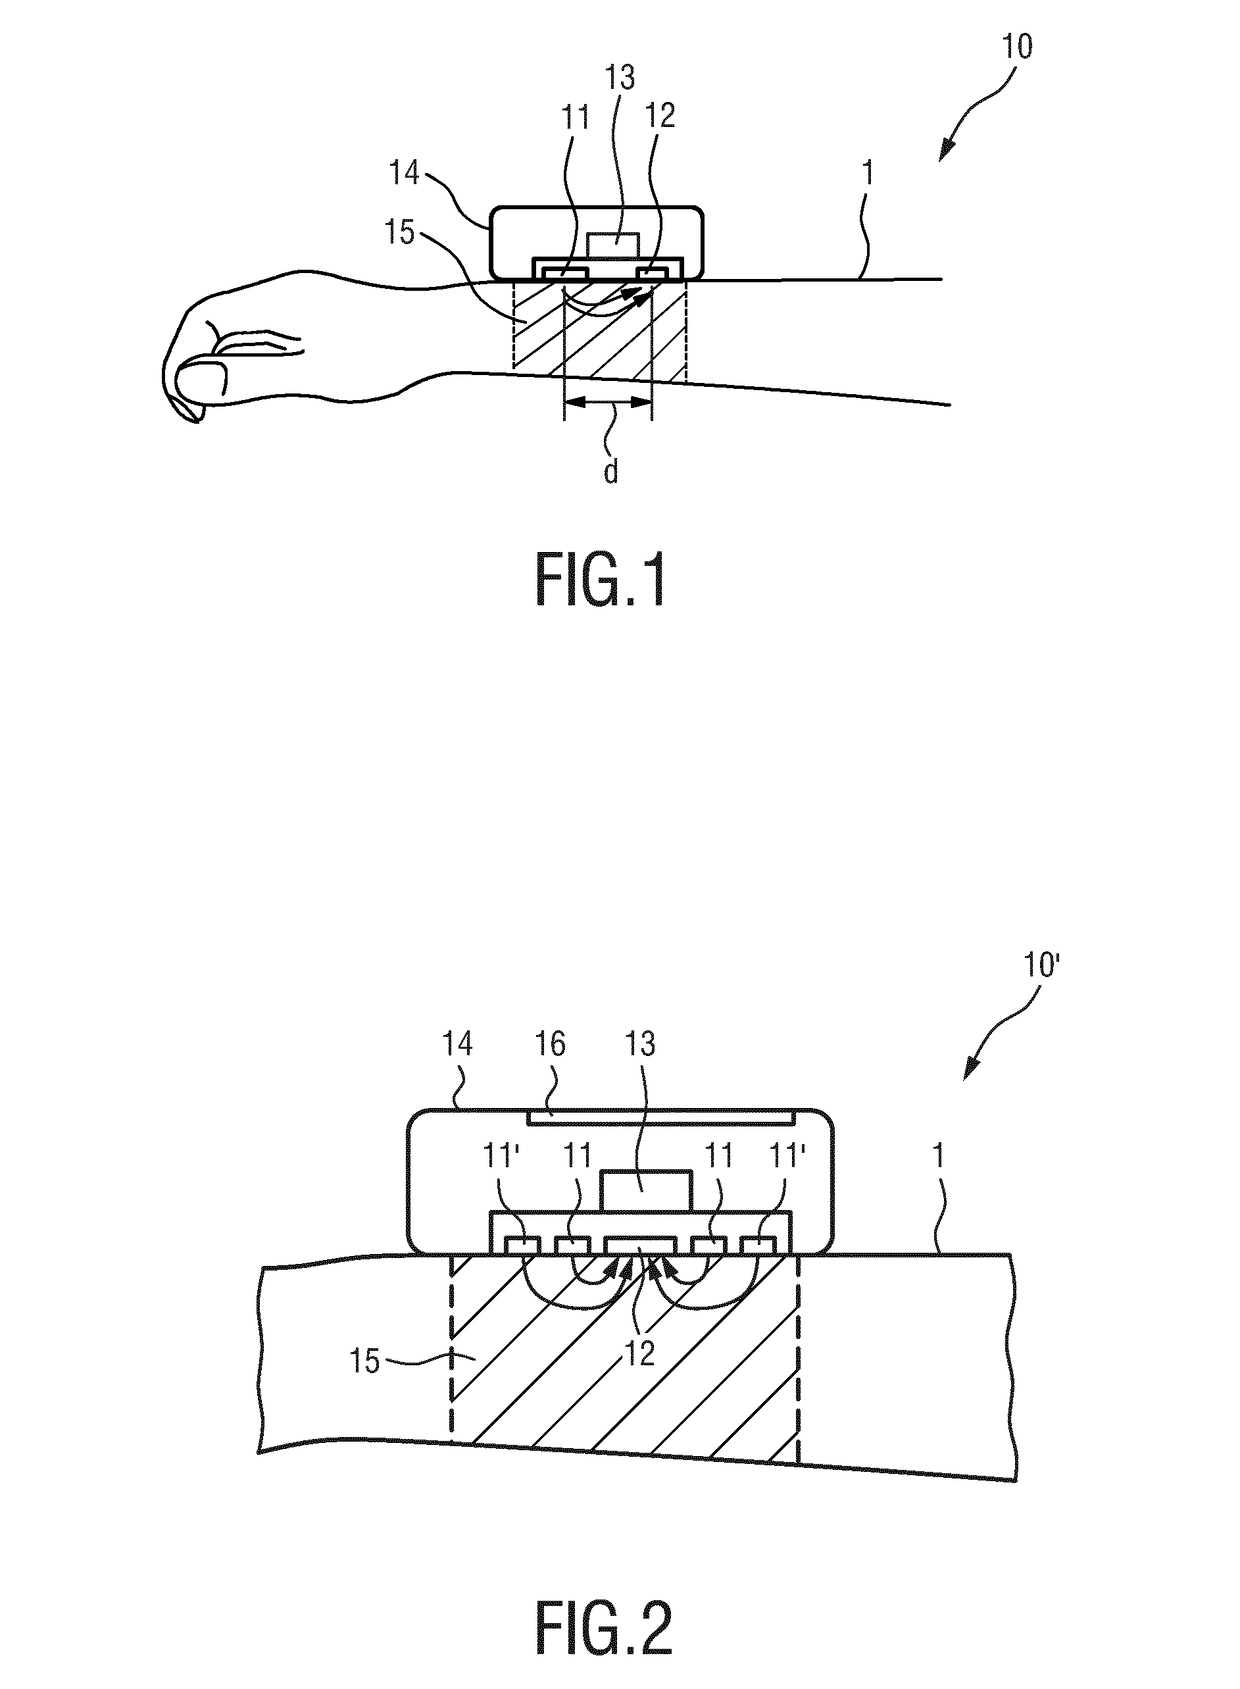 Wearable device and method for determining electro-dermal activity of a subject